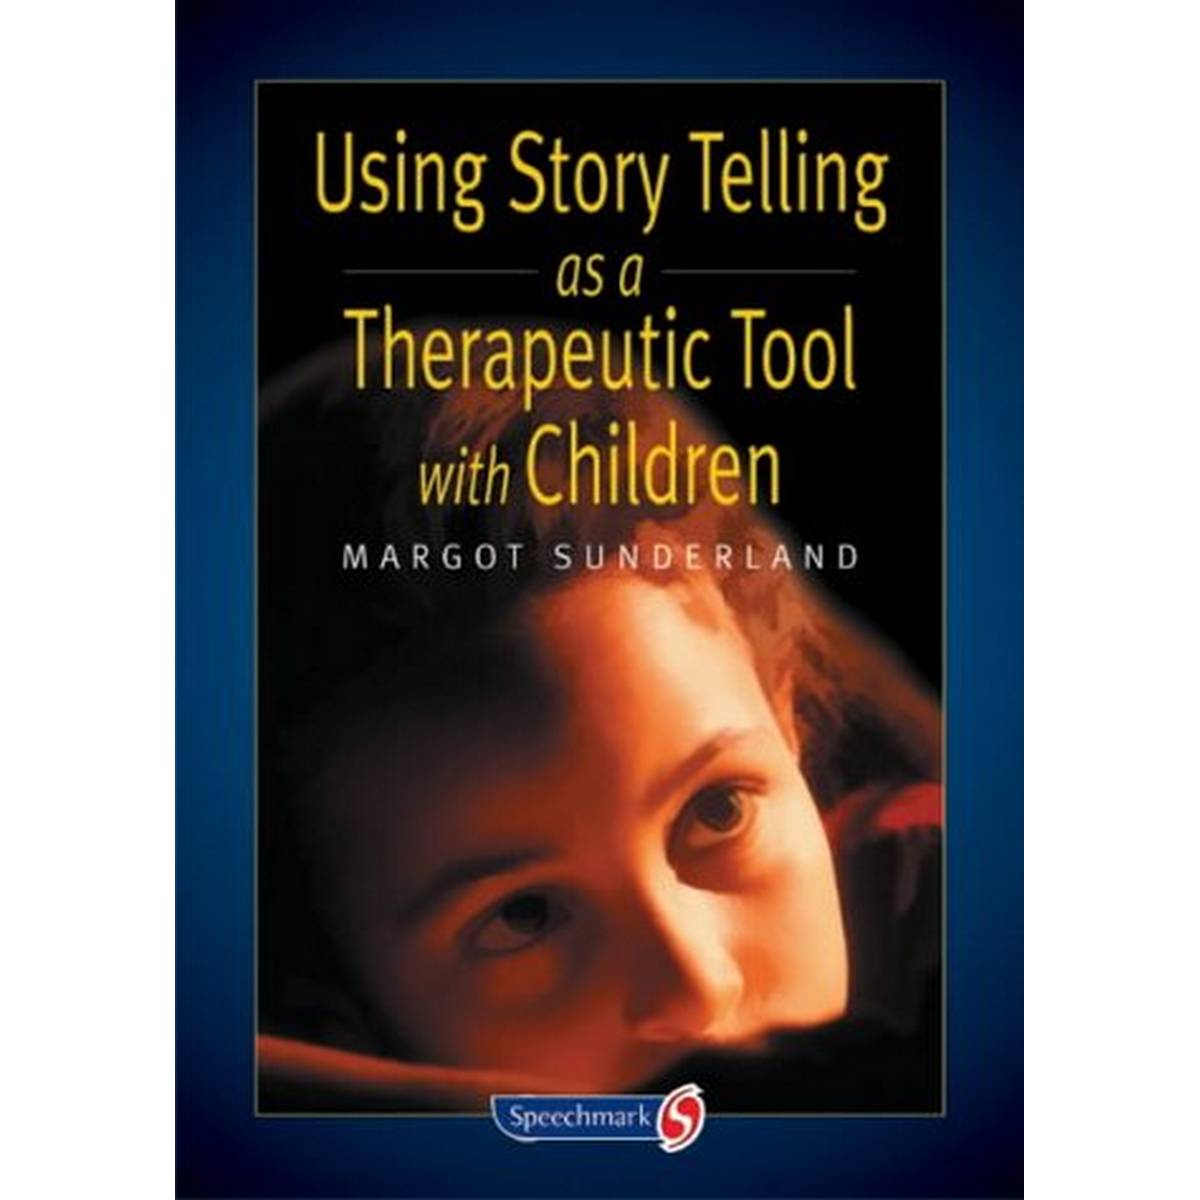 Using Story Telling as Therapeutic Tool with Children